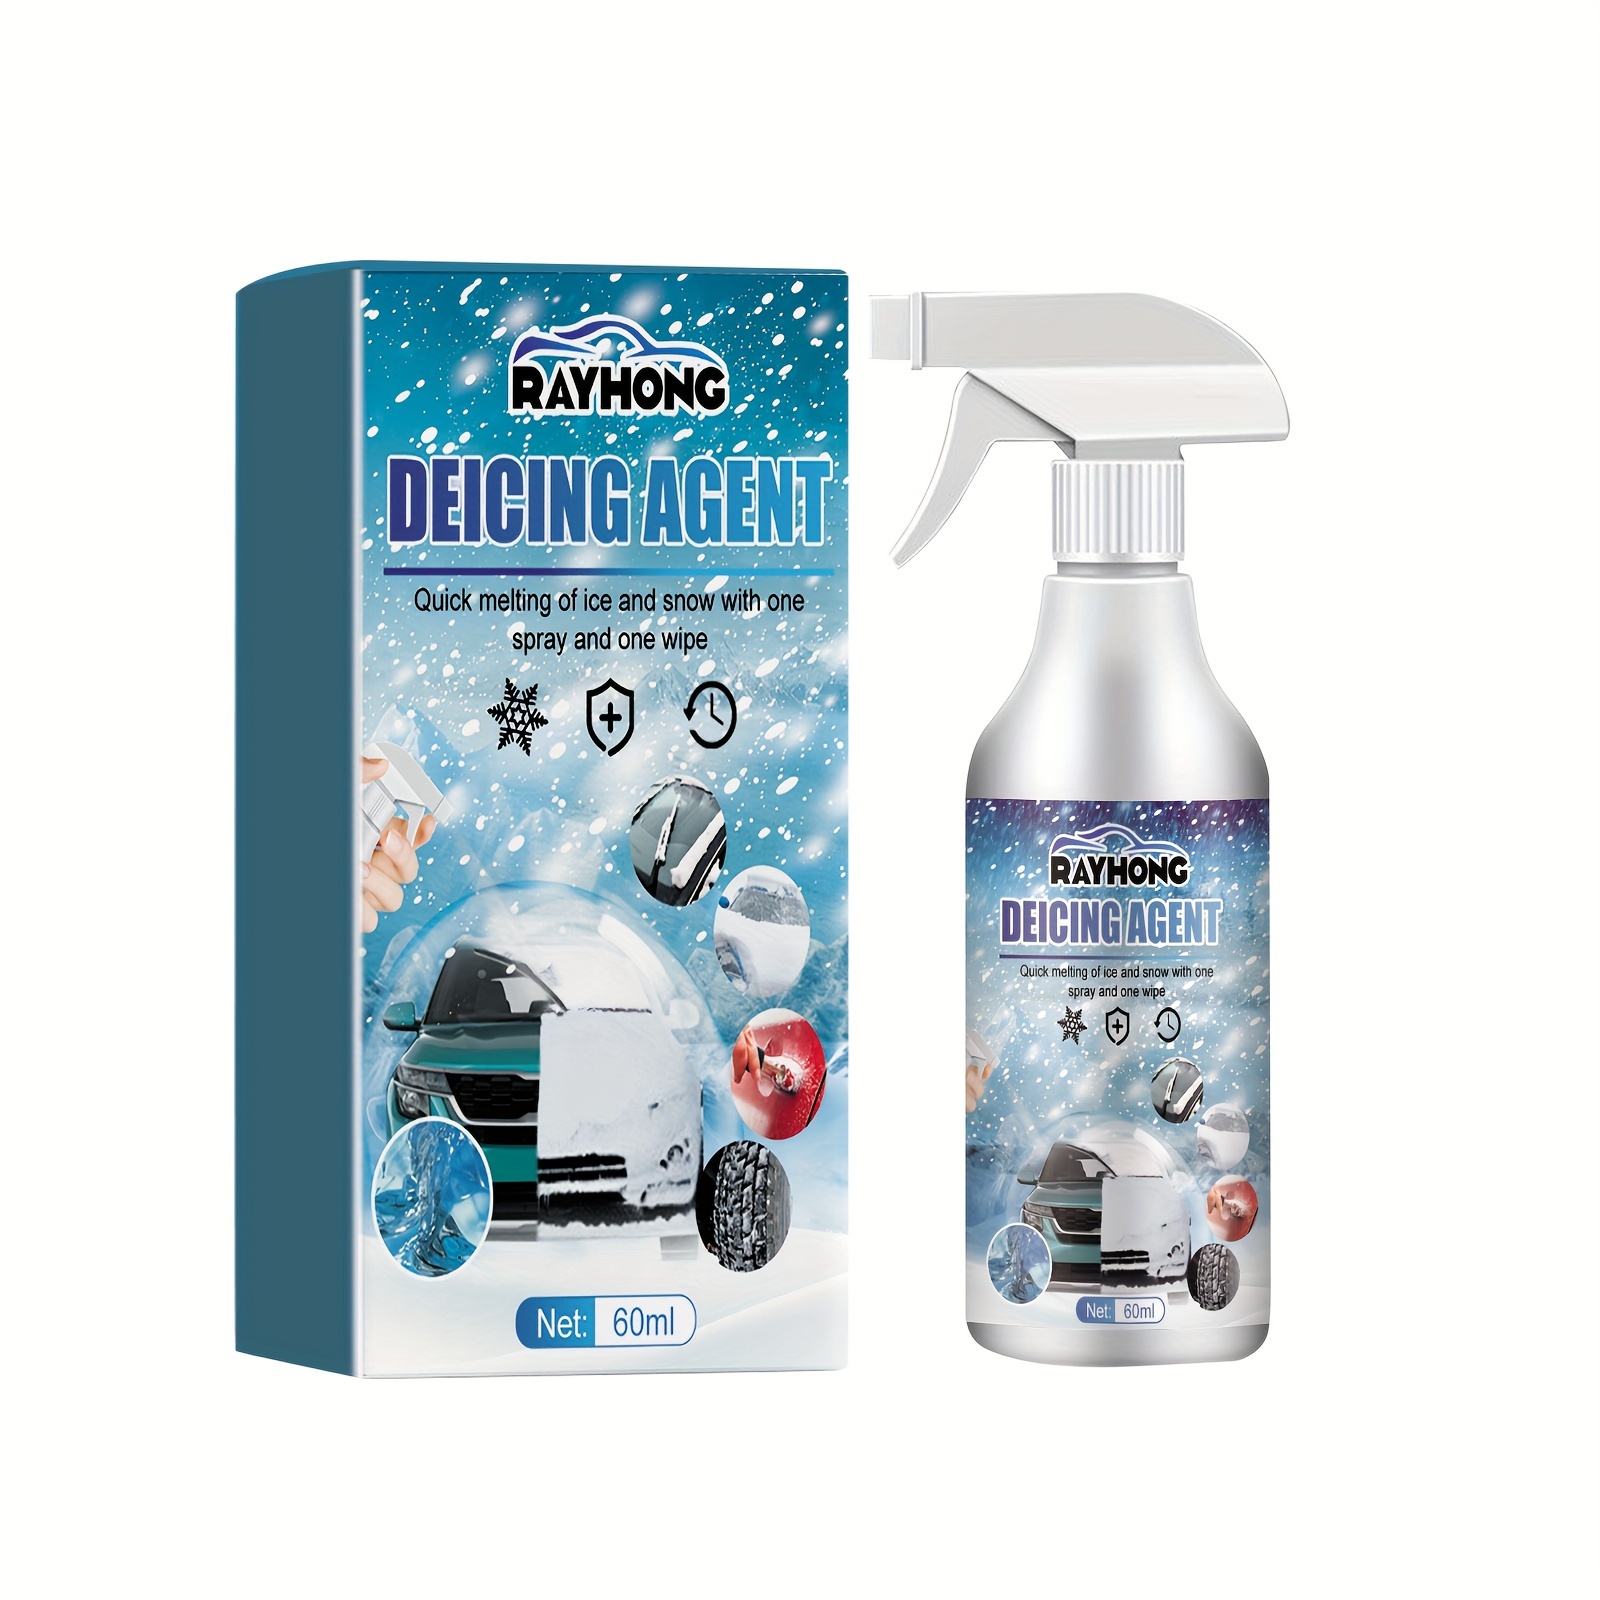 2x Car Windshield Snow Melt Spray Multi-purpose Deicing And Snow Melting  Agent Prevents Re-freezing Thawing Spray For Car And Home Kr